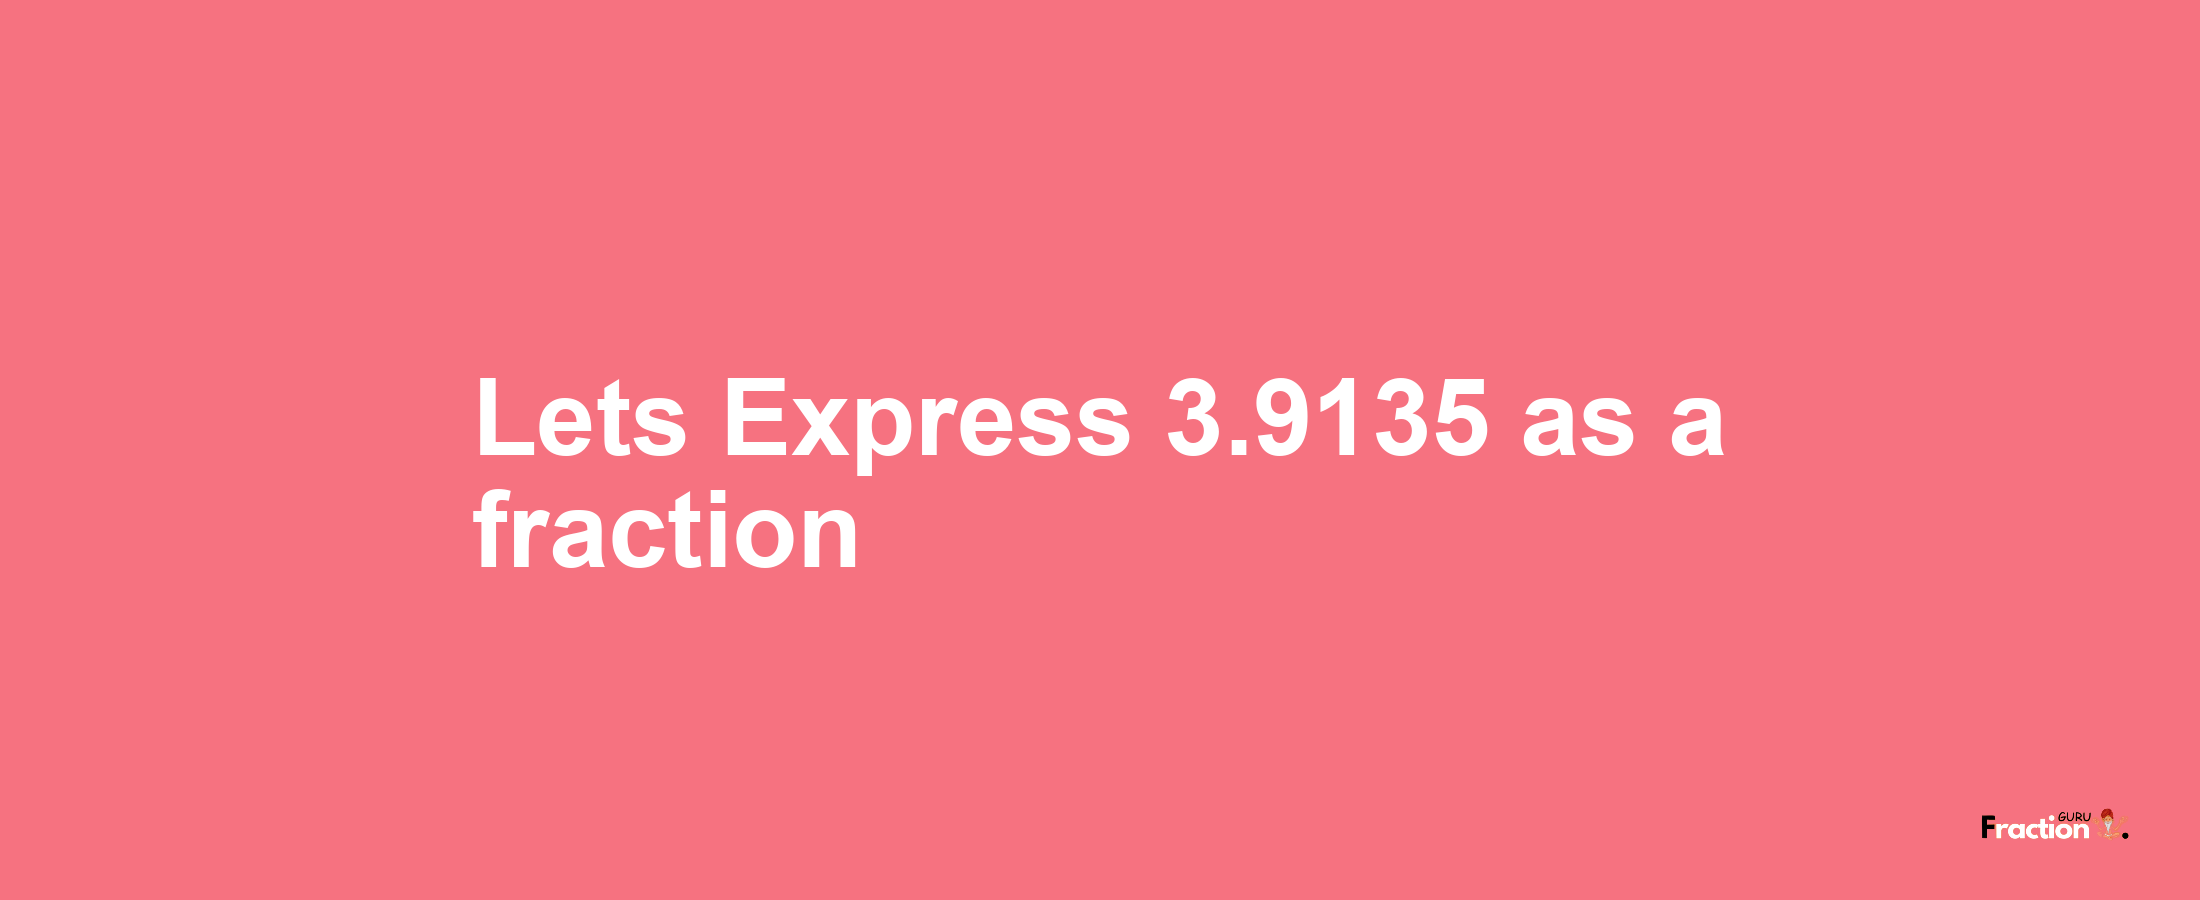 Lets Express 3.9135 as afraction